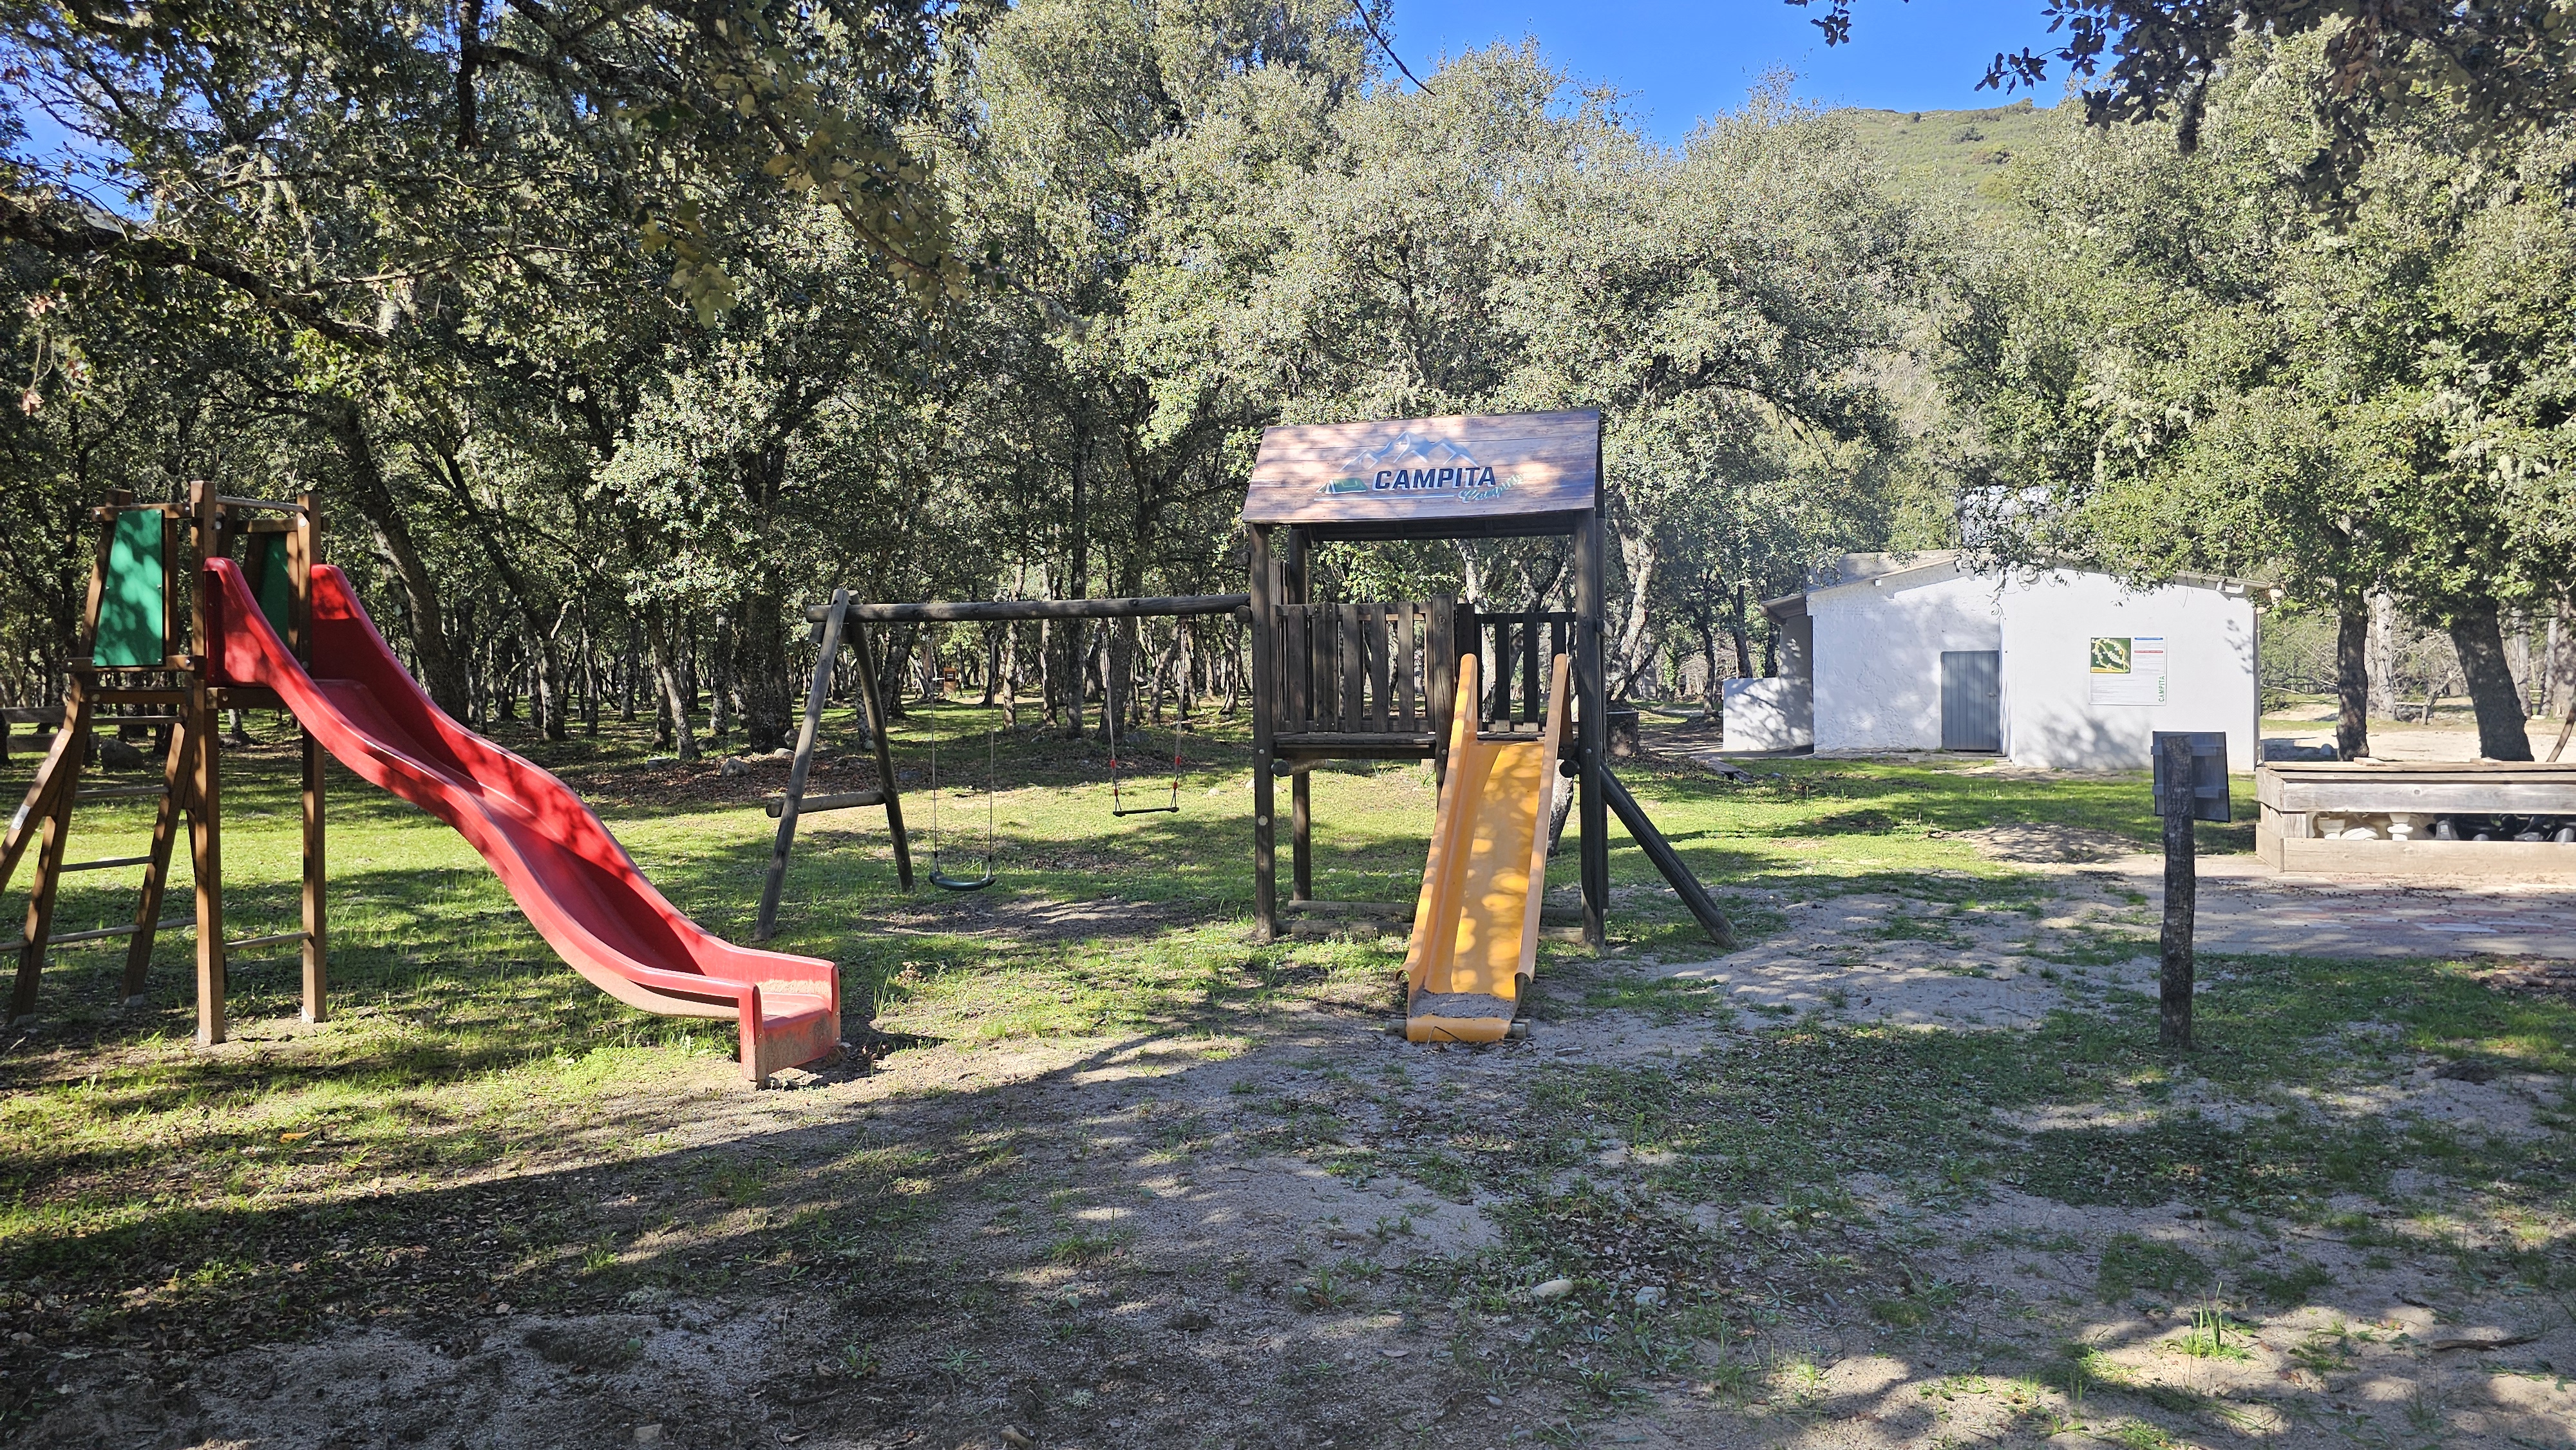 Play area at the Campita campsite, with trampolines, slides, swings